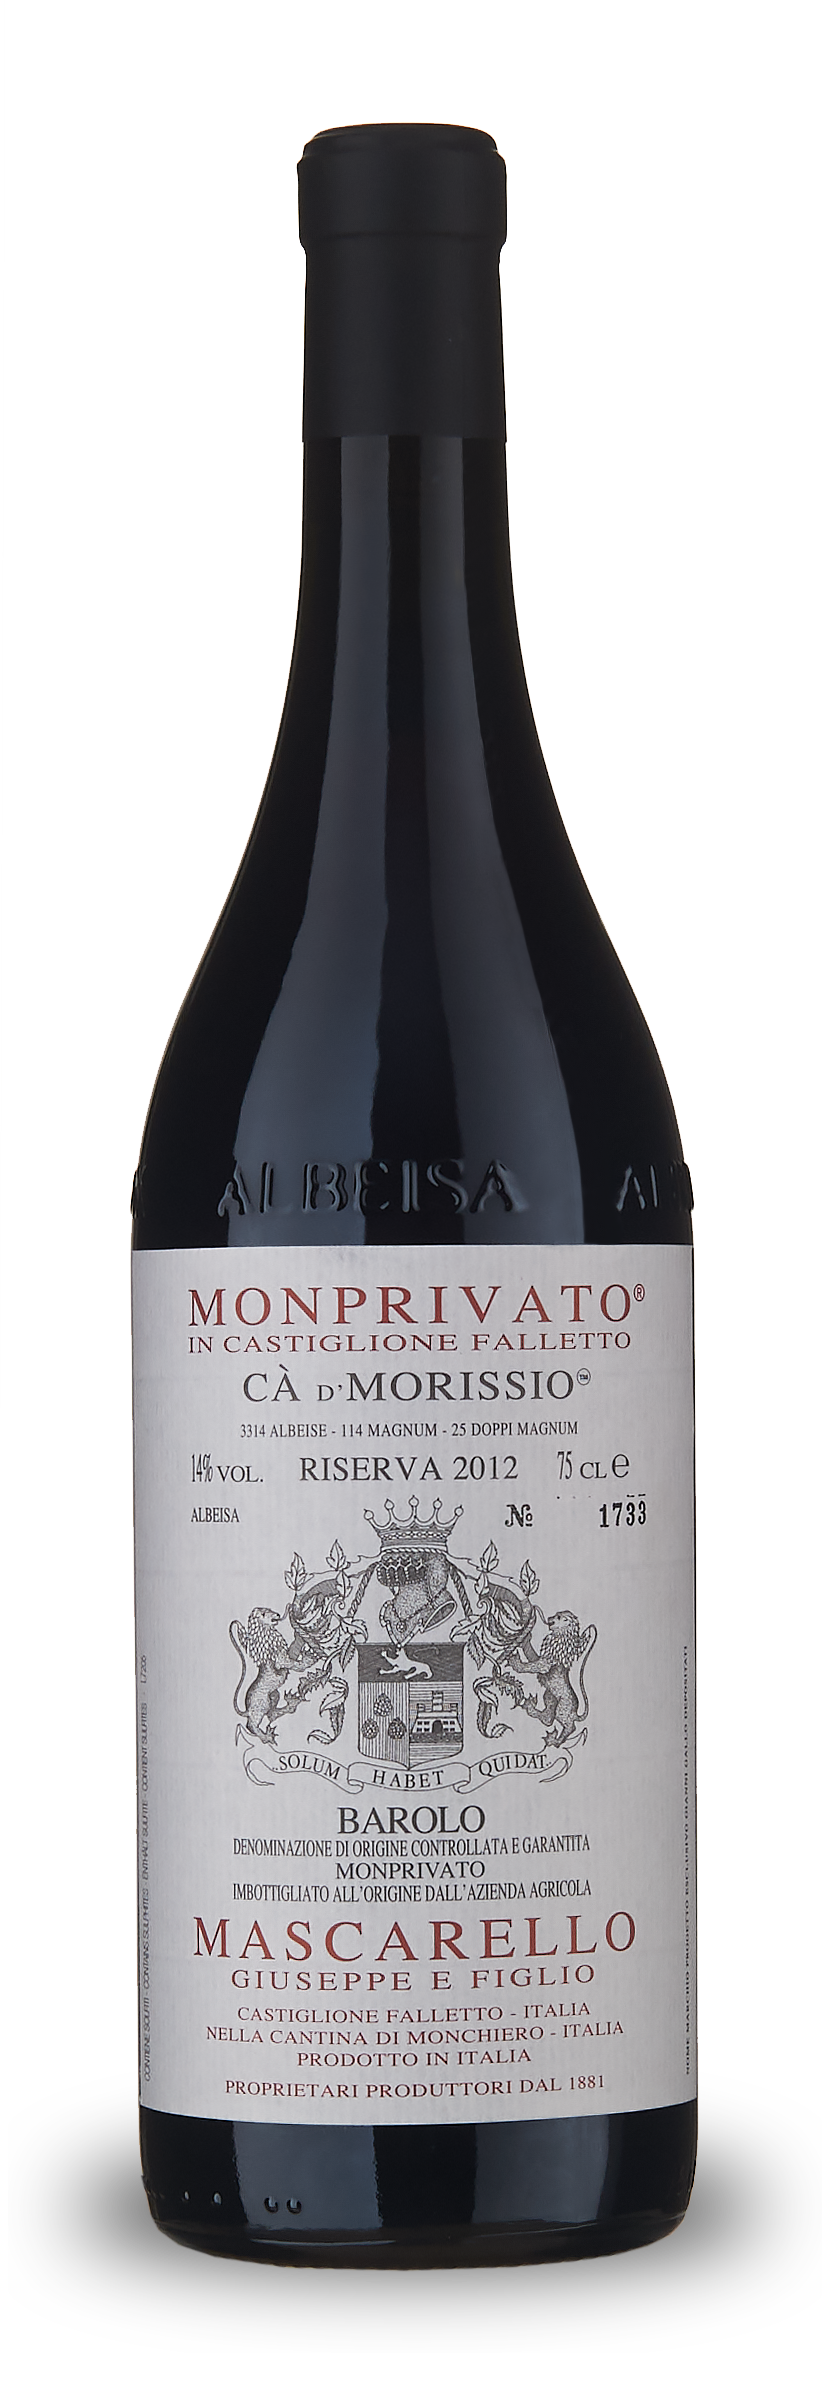 Barolo Monprivato Riserva Cà d'Morissio 2013 - ONLY ON PRE-ALLOCATION Contact us for further information (indulge@flemmings.wine)